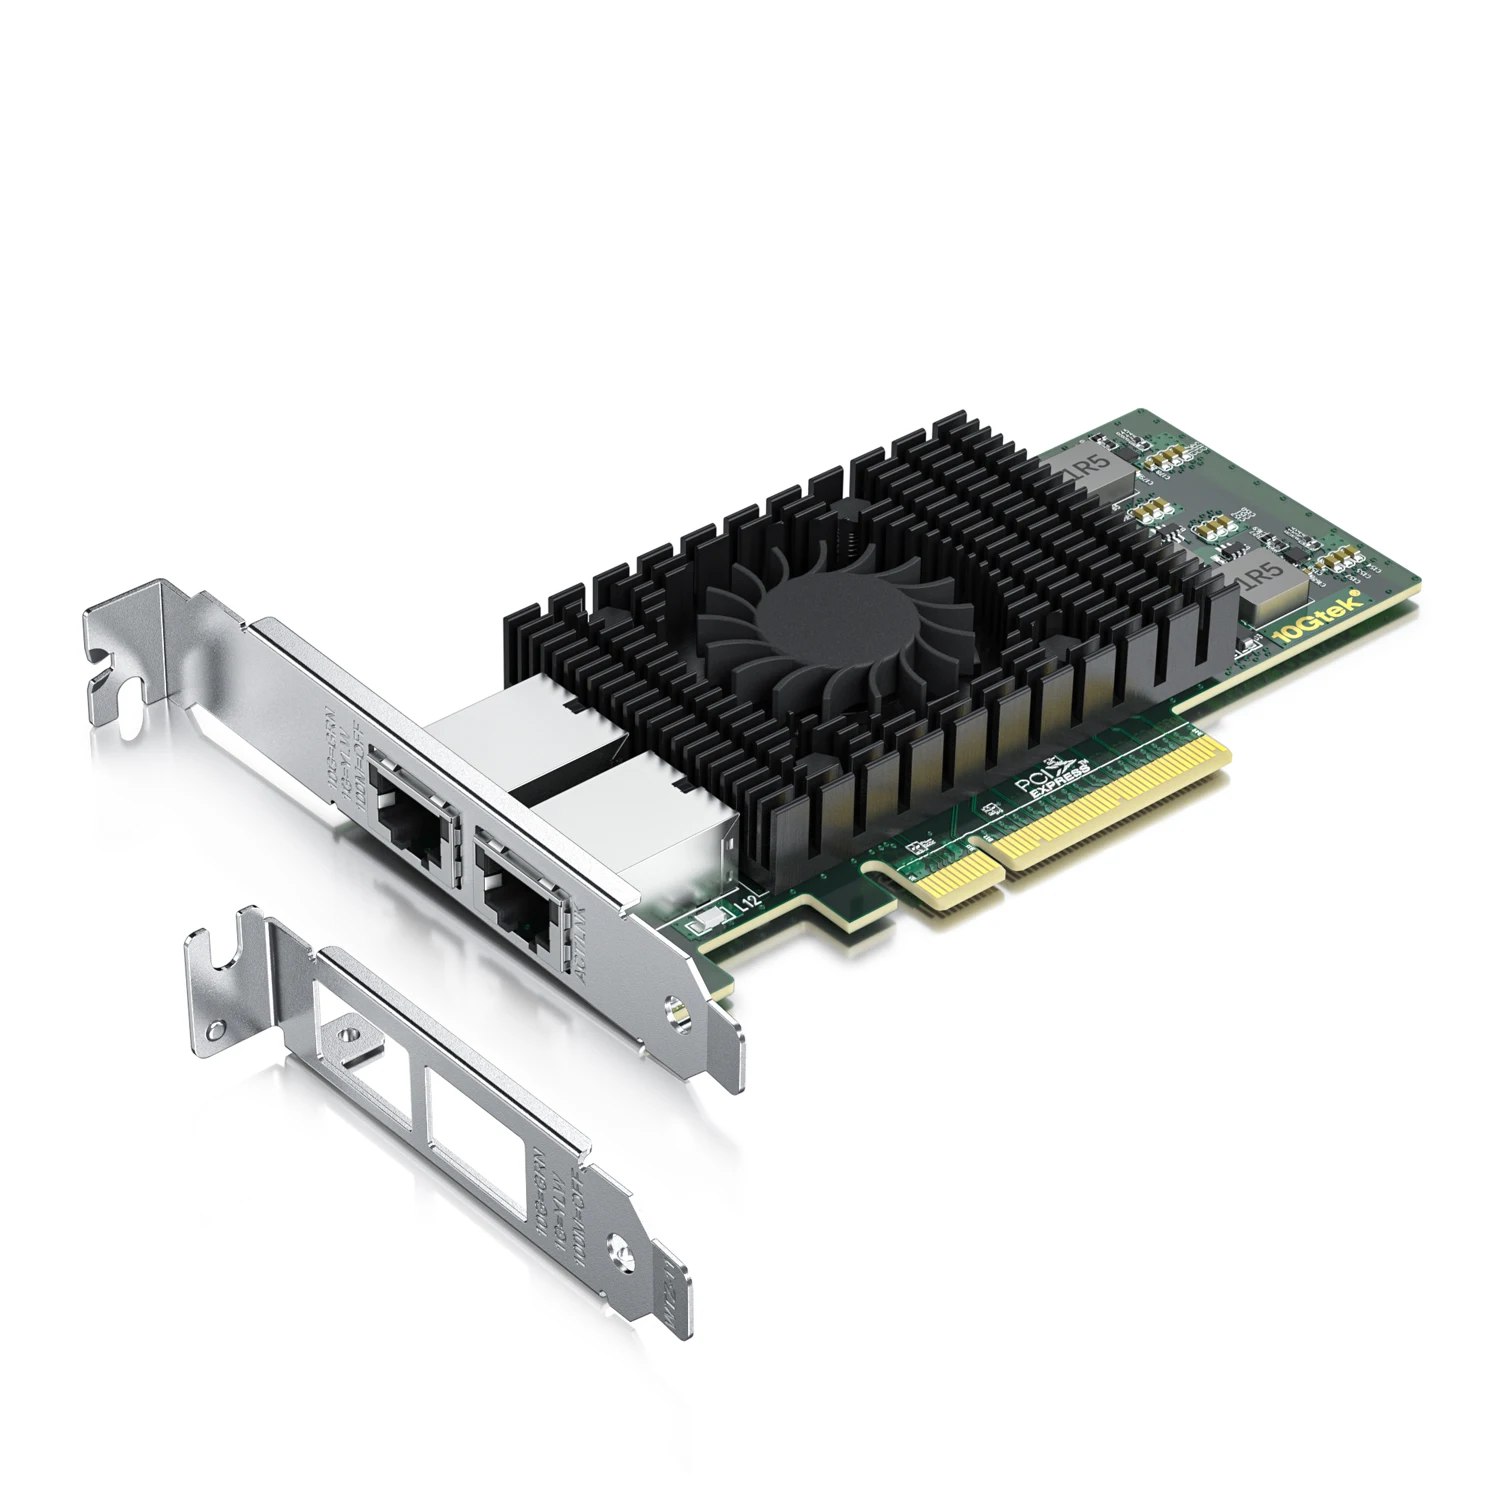 10Gb PCI-E NIC Network Card, PCI Express Ethernet LAN Adapter Support Windows Server/Windows/Linux/ESX, Compare to Intel X540-T2 pe2g4bpi35la sd intel i350am4 4x 10 100 1000base t express bypass server adapter rj45